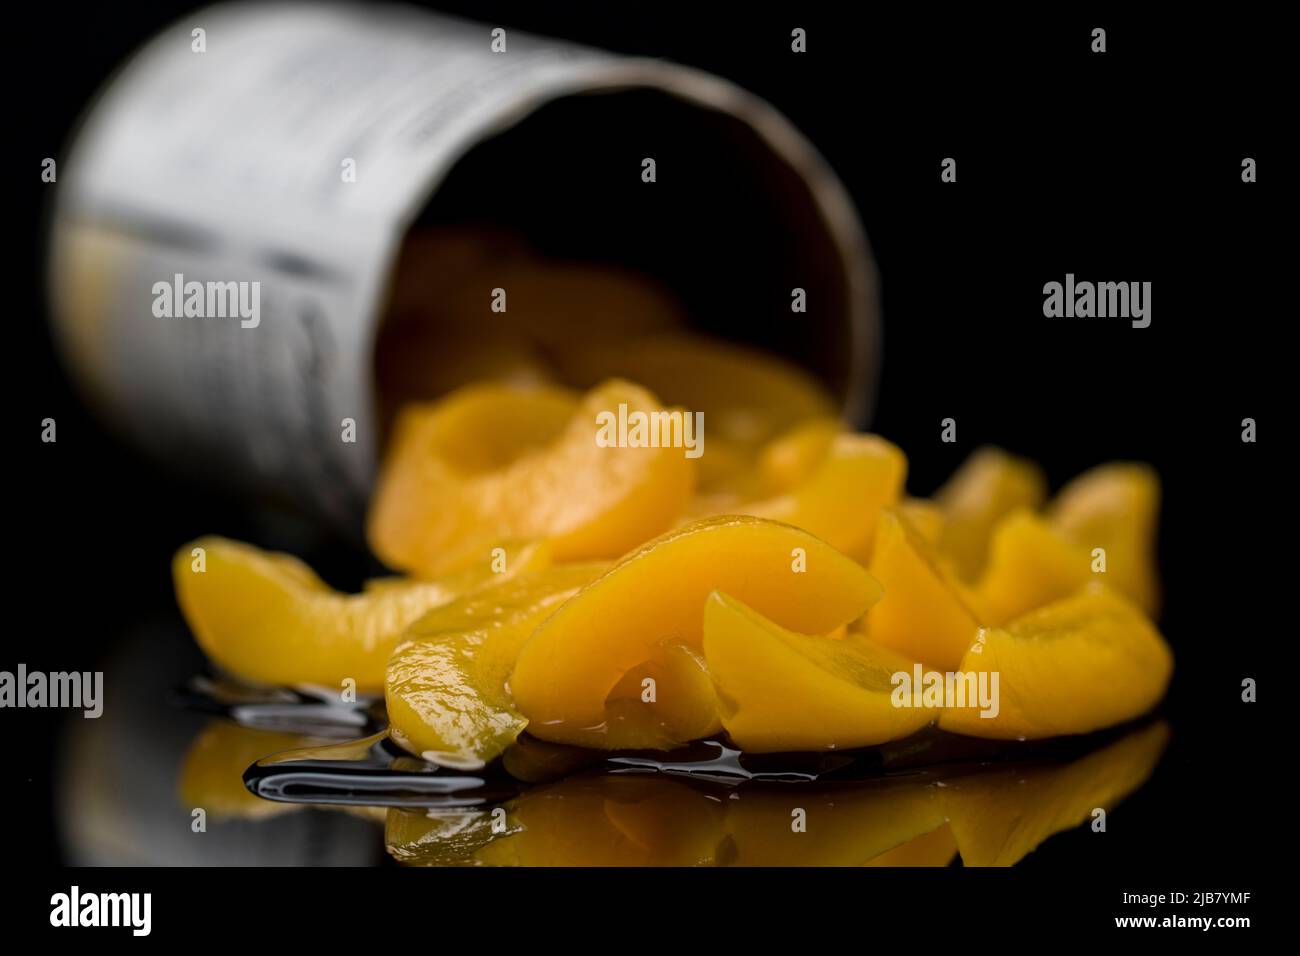 Food close up peach slices in a can. Packaged food in tin can. Stock Photo